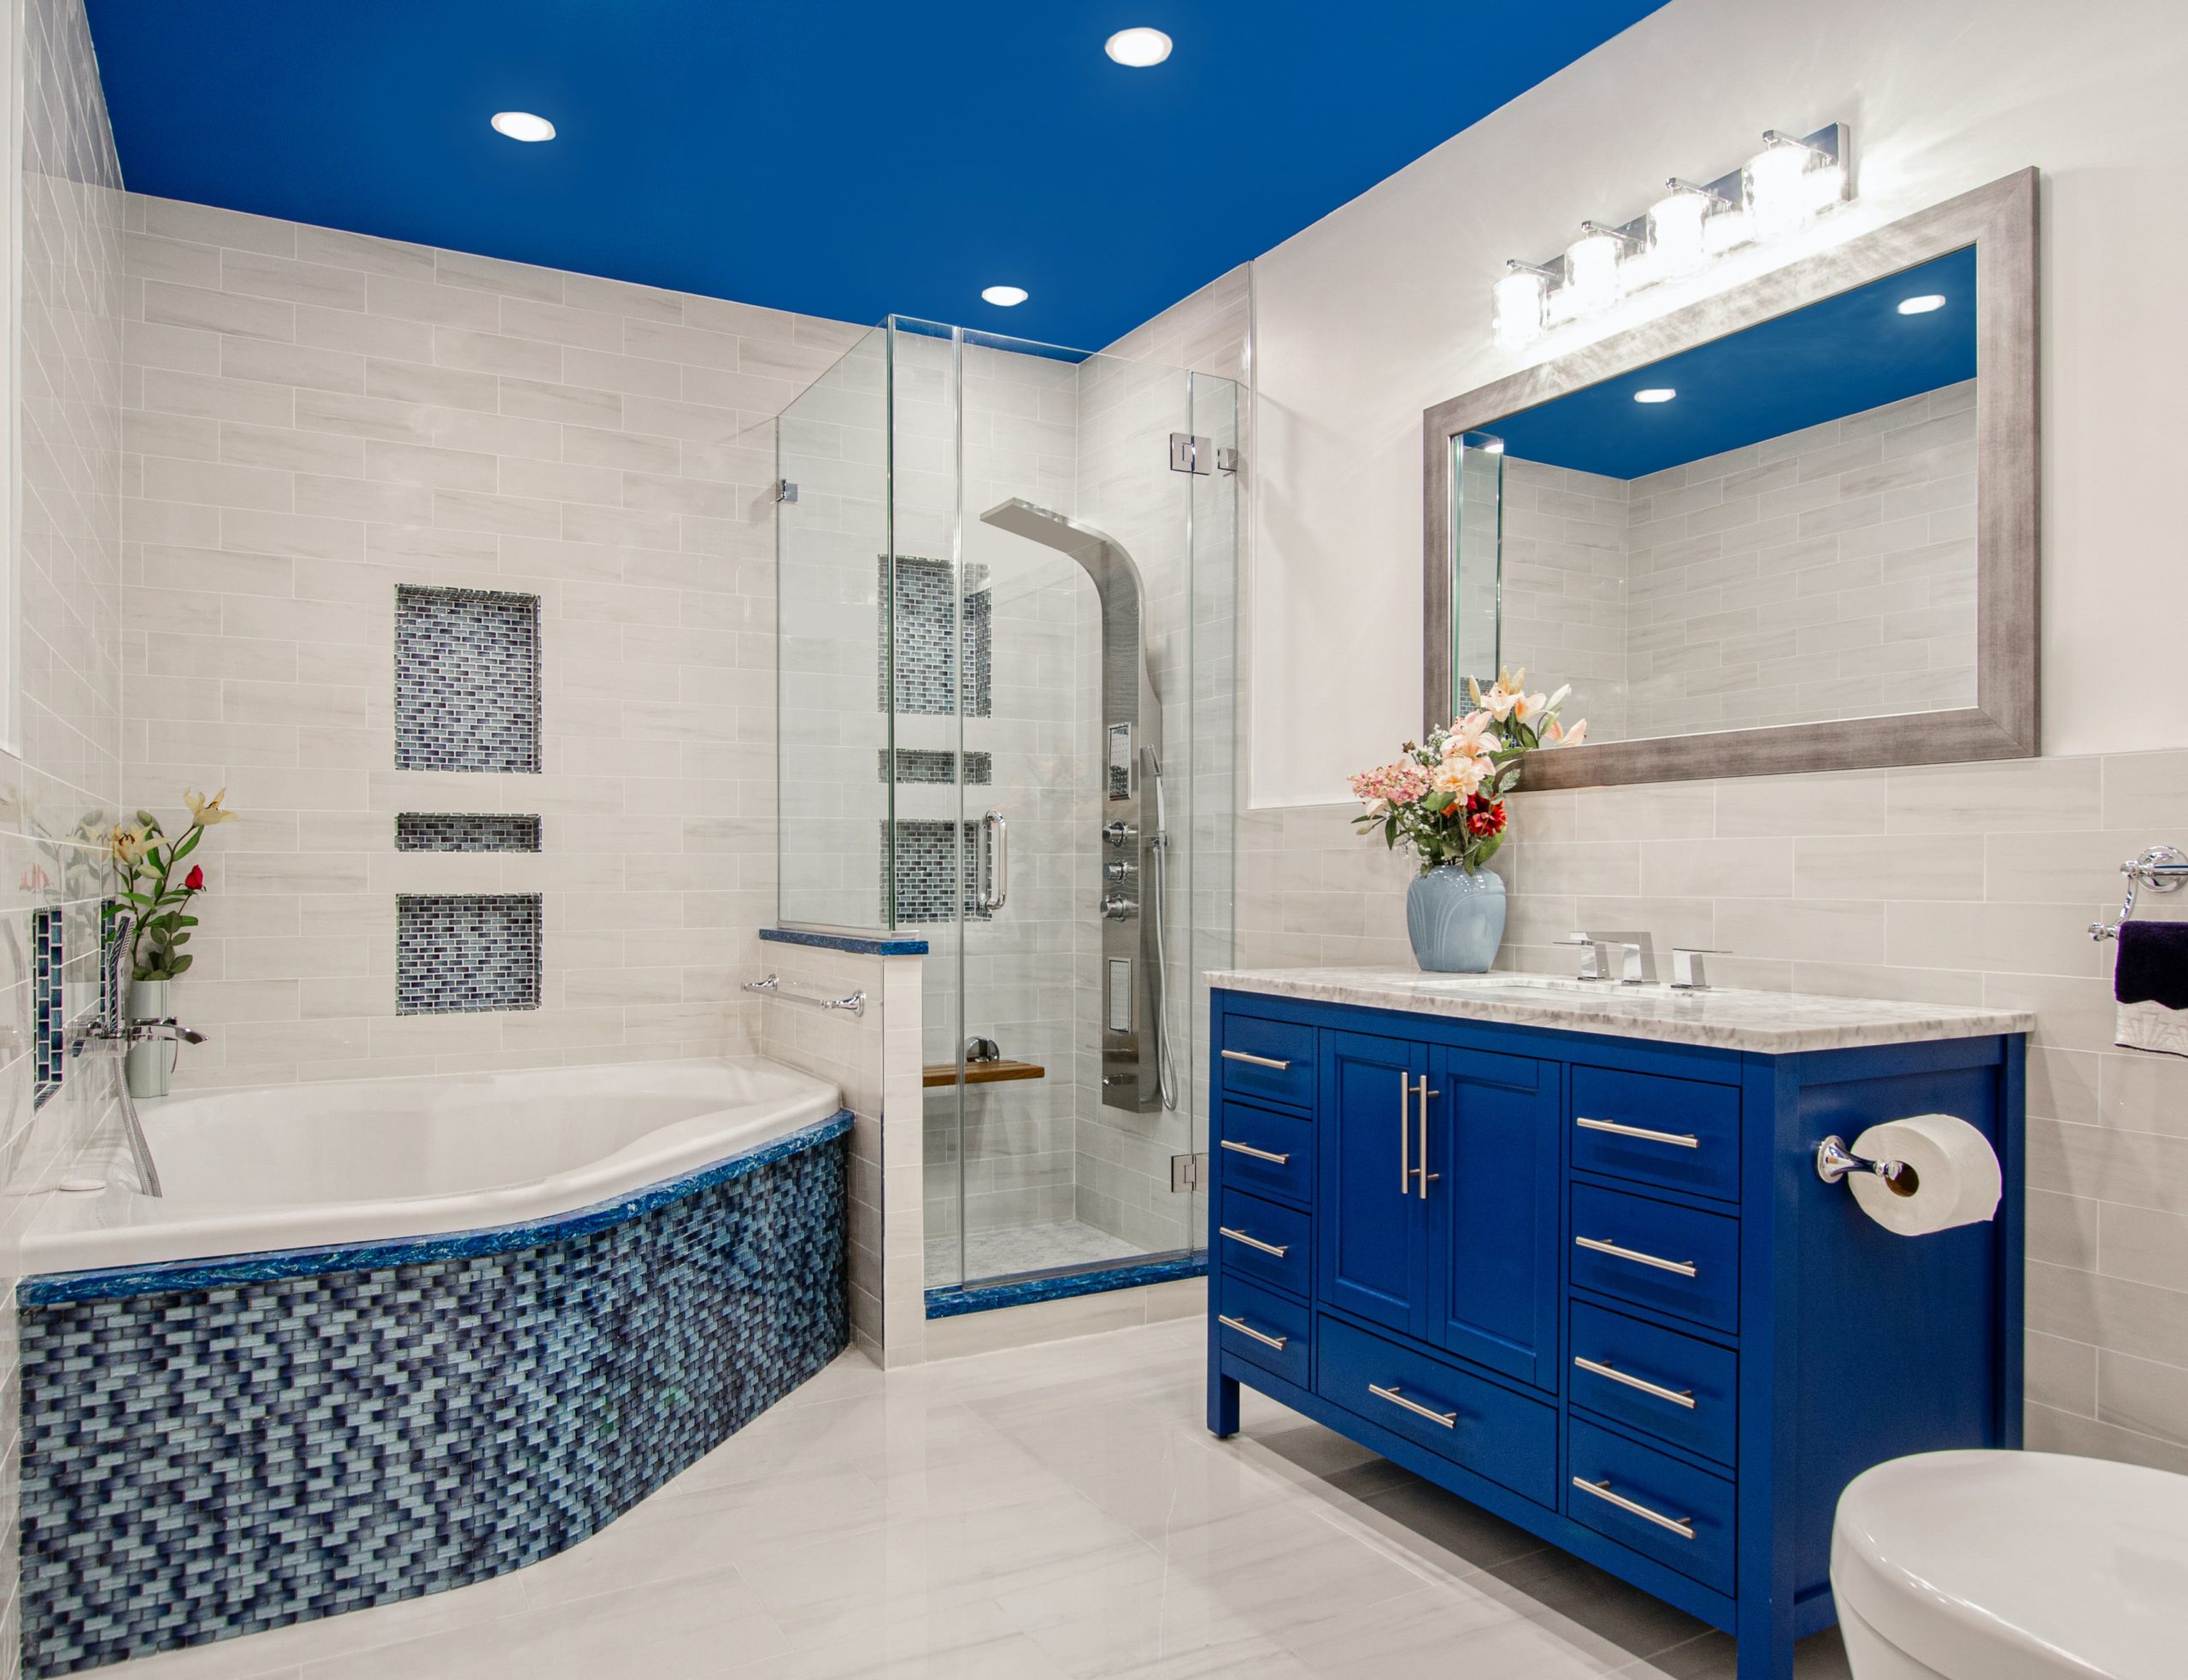 How to Easily Improve Your Bathroom